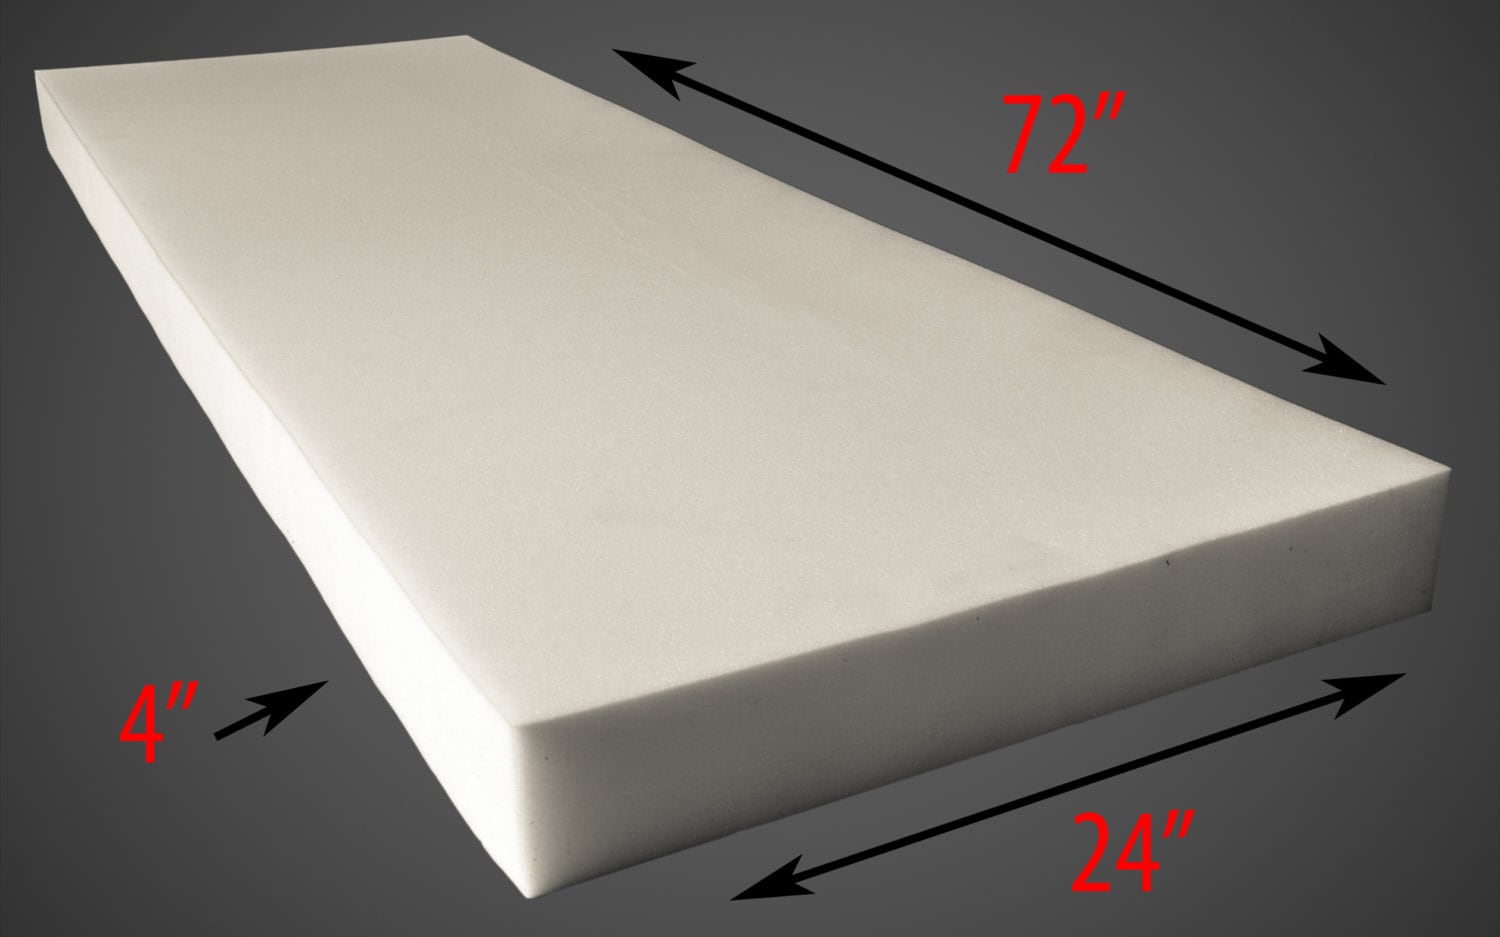 Upholstery Foam 4 Thick 24 Wide x 72 Long